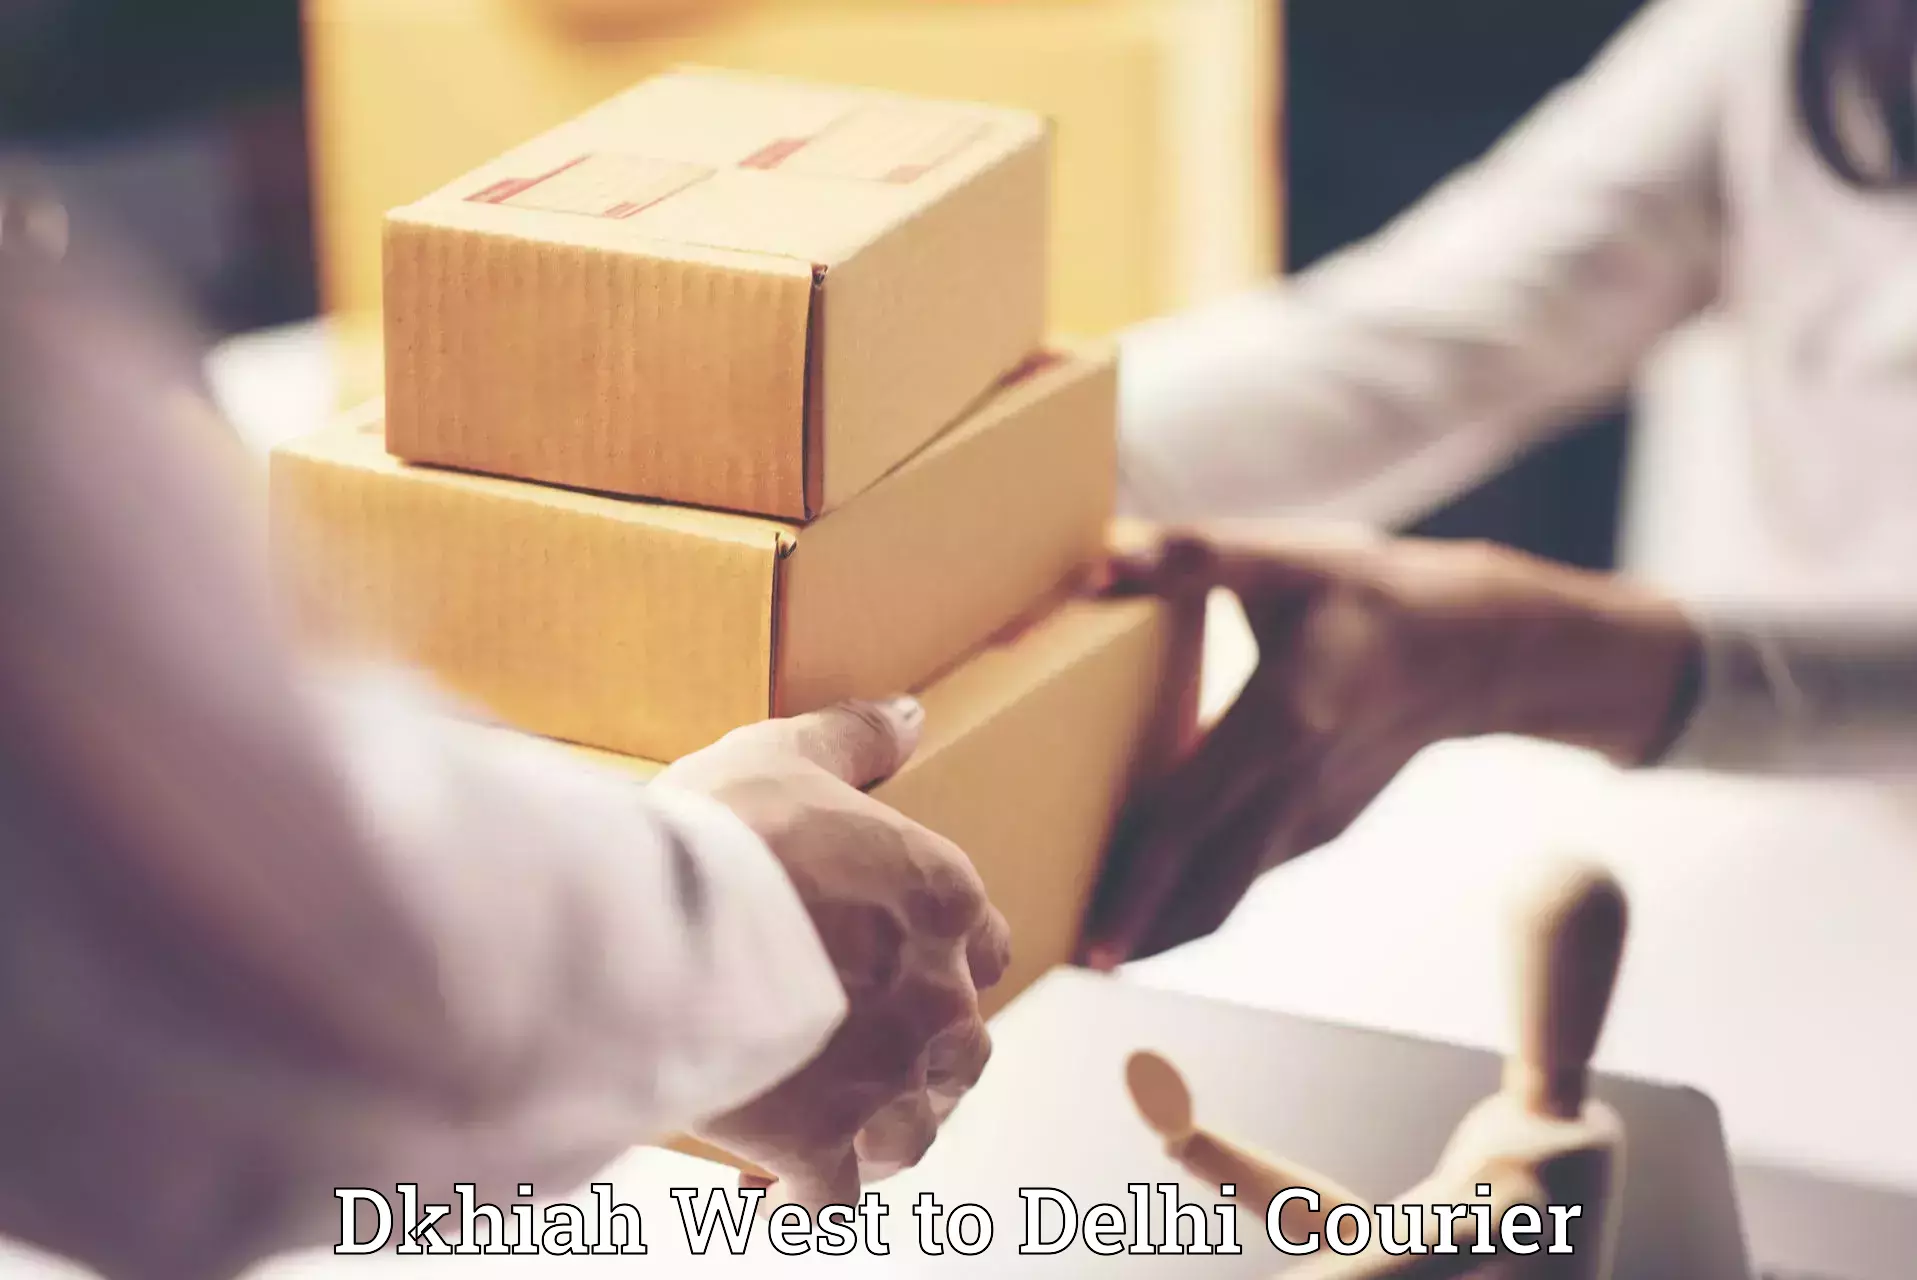 Luggage transfer service Dkhiah West to Jhilmil